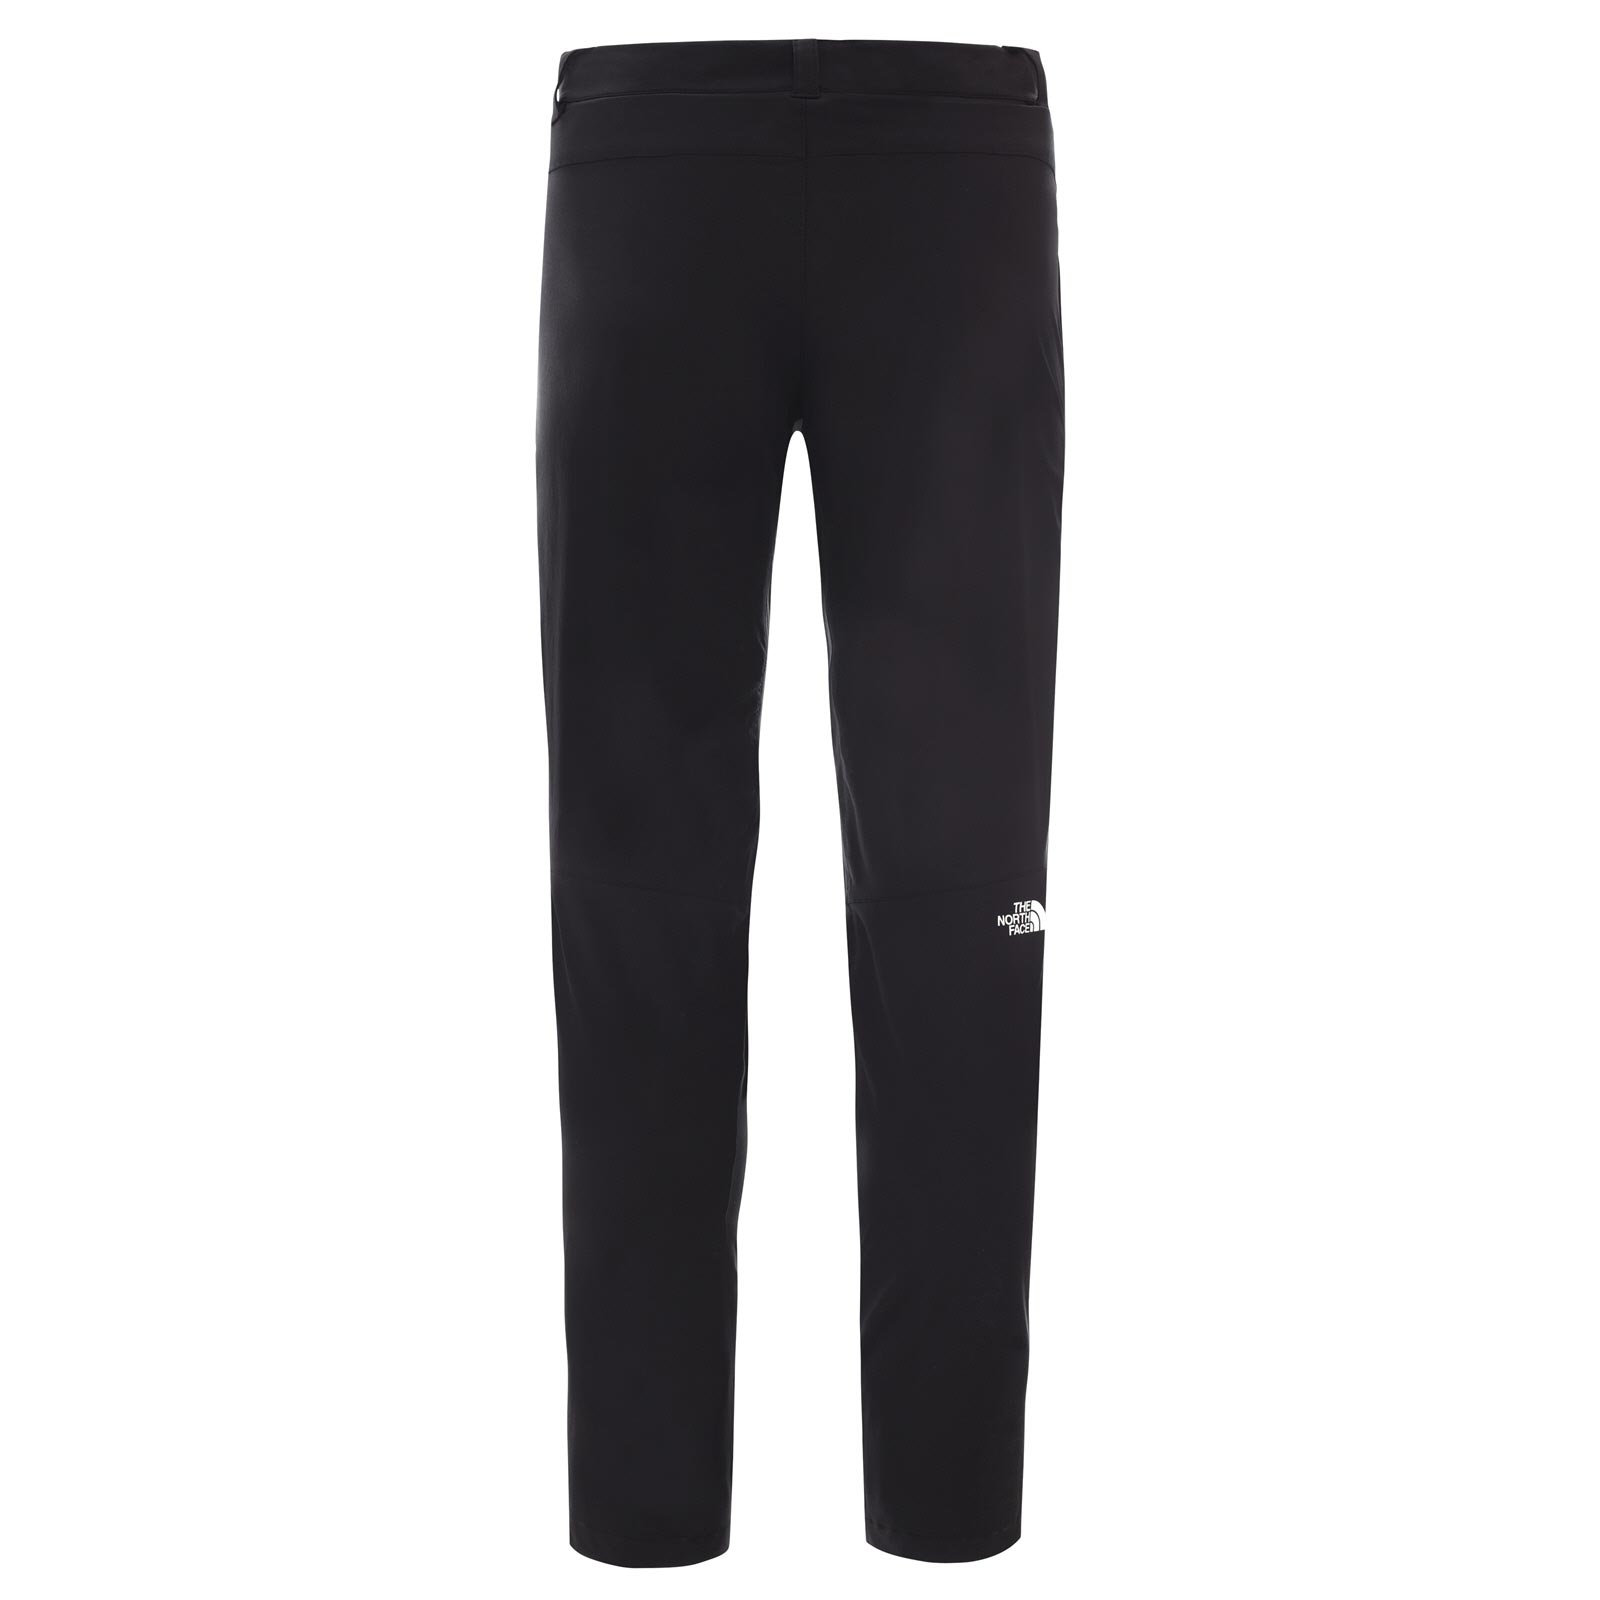 THE NORTH FACE EXTENT III MENS PANTS